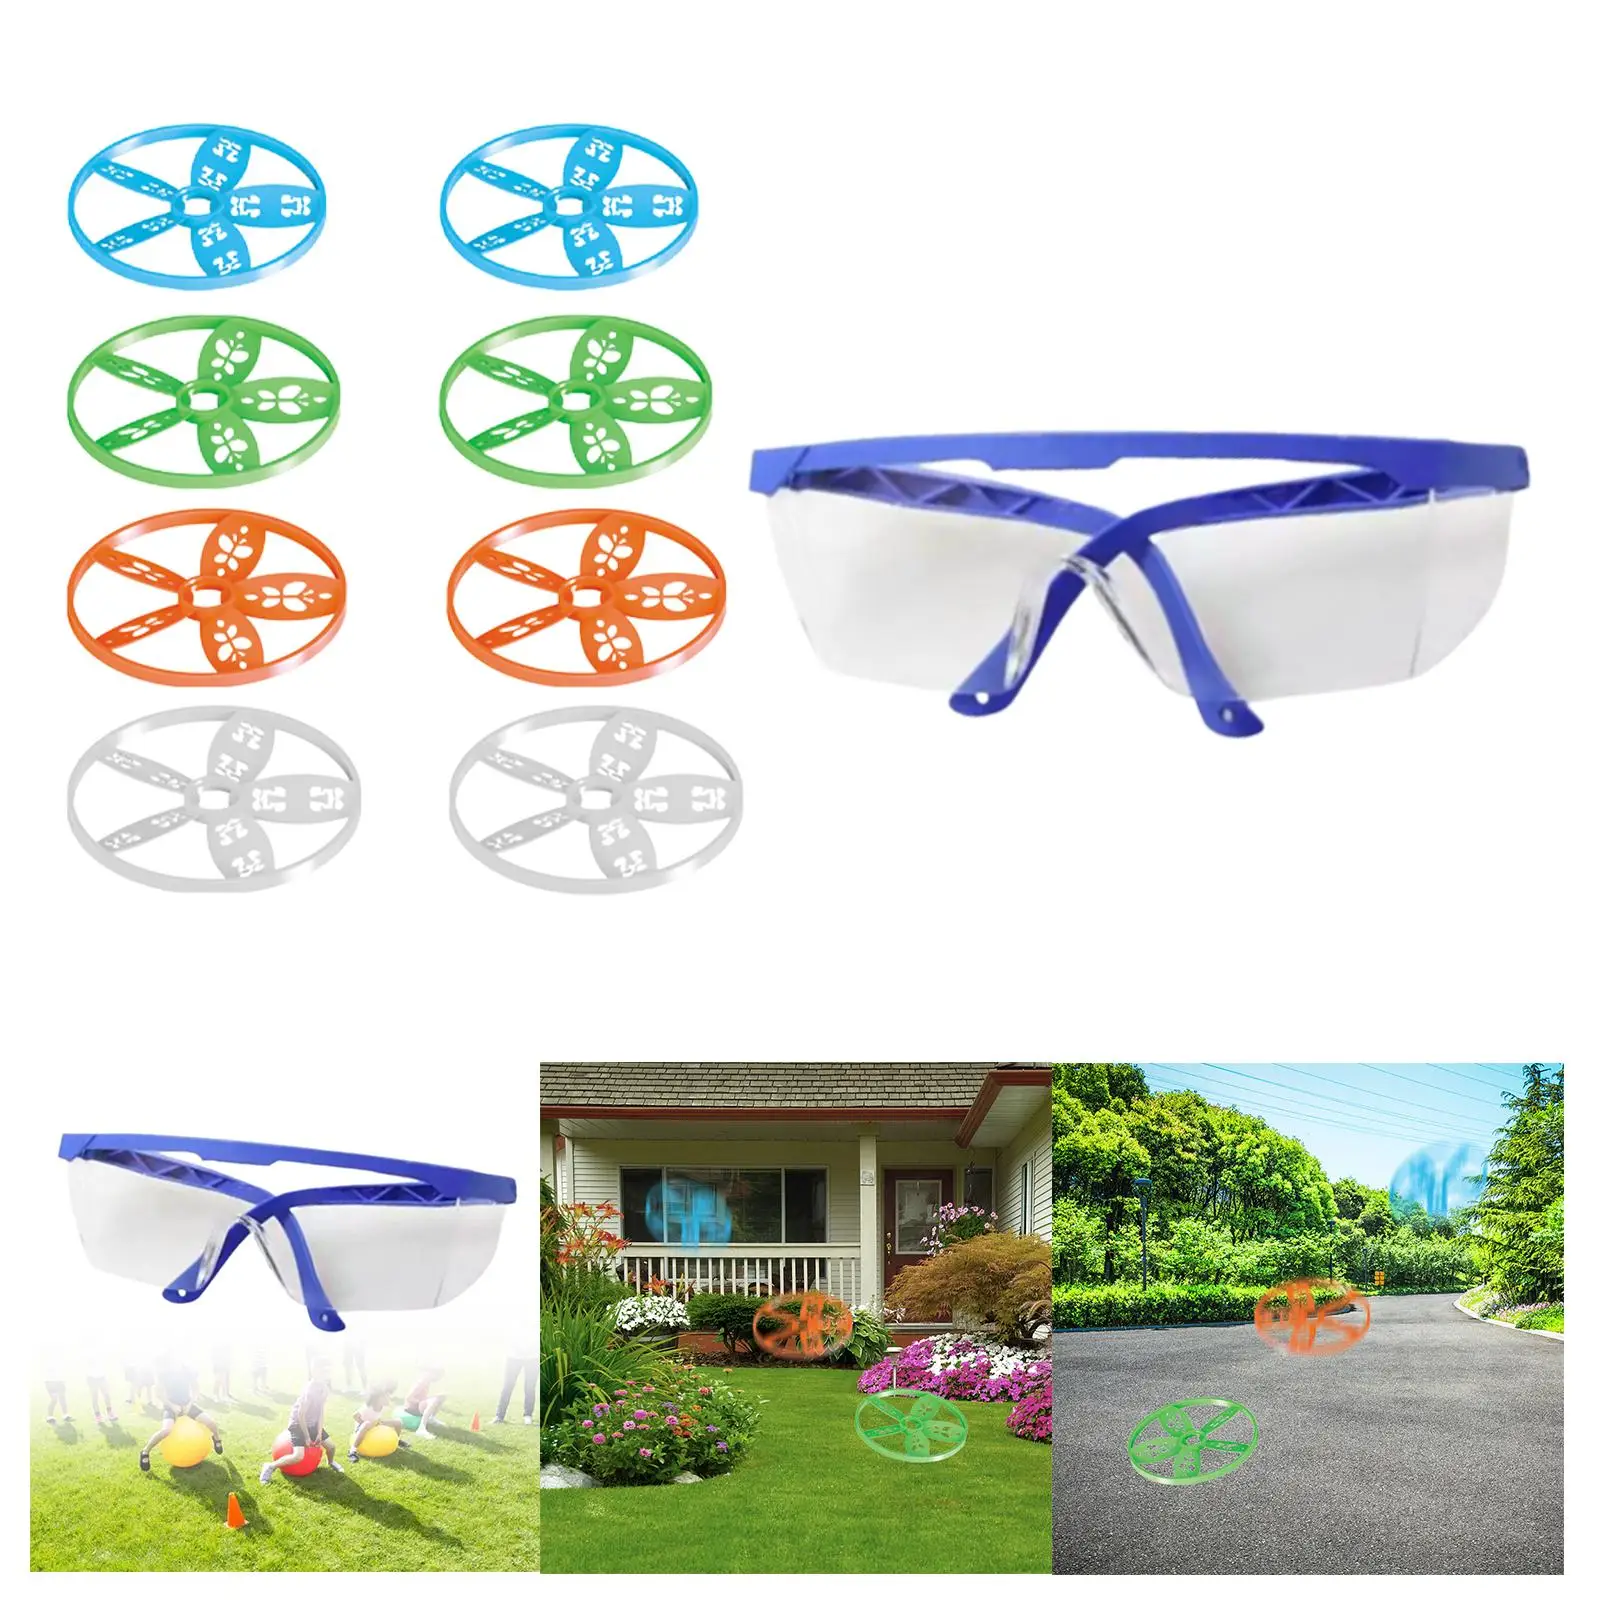 

Flying Toy Entertainment Fun Saucer Disc Helicopter Toy Flying Saucers Toy for Kids Children Boys Goodie Bag Fillers